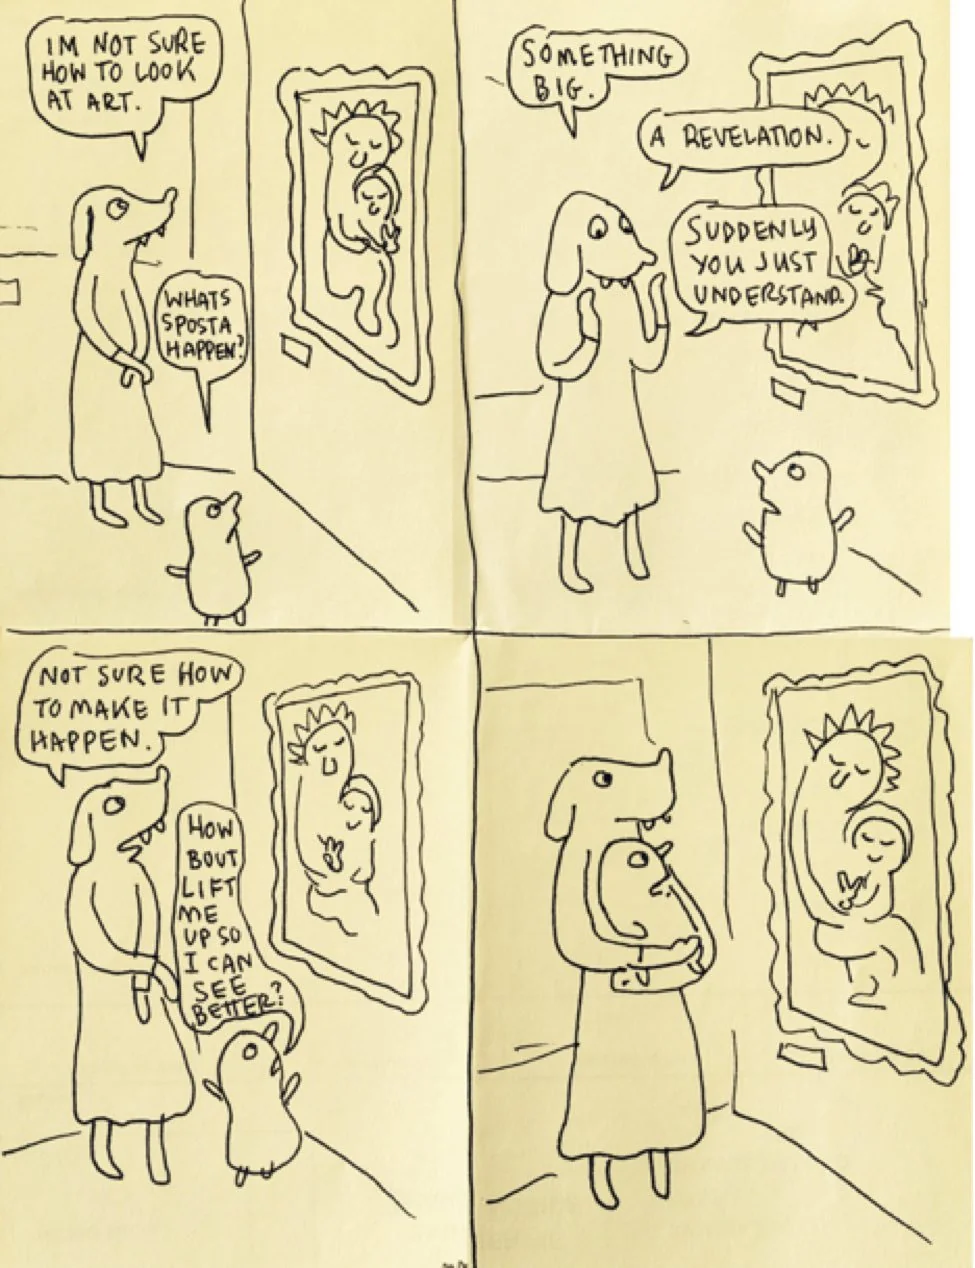 How to Look at Art: A Short Visual Guide by Cartoonist Lynda Barry: four panels. a parent in the first panel says i'm not sure how to look at art. their child asks whats sposta happen. they are looking at a picture of the virgin mary and jesus. the second panel, the parent says something big, a revelation, suddenly you just understand. panel 3 parent says not sure how to make it happens. the child says how bout lift me up so i can see better. panel 4 the child and parent are lifted in a reflection of the art 